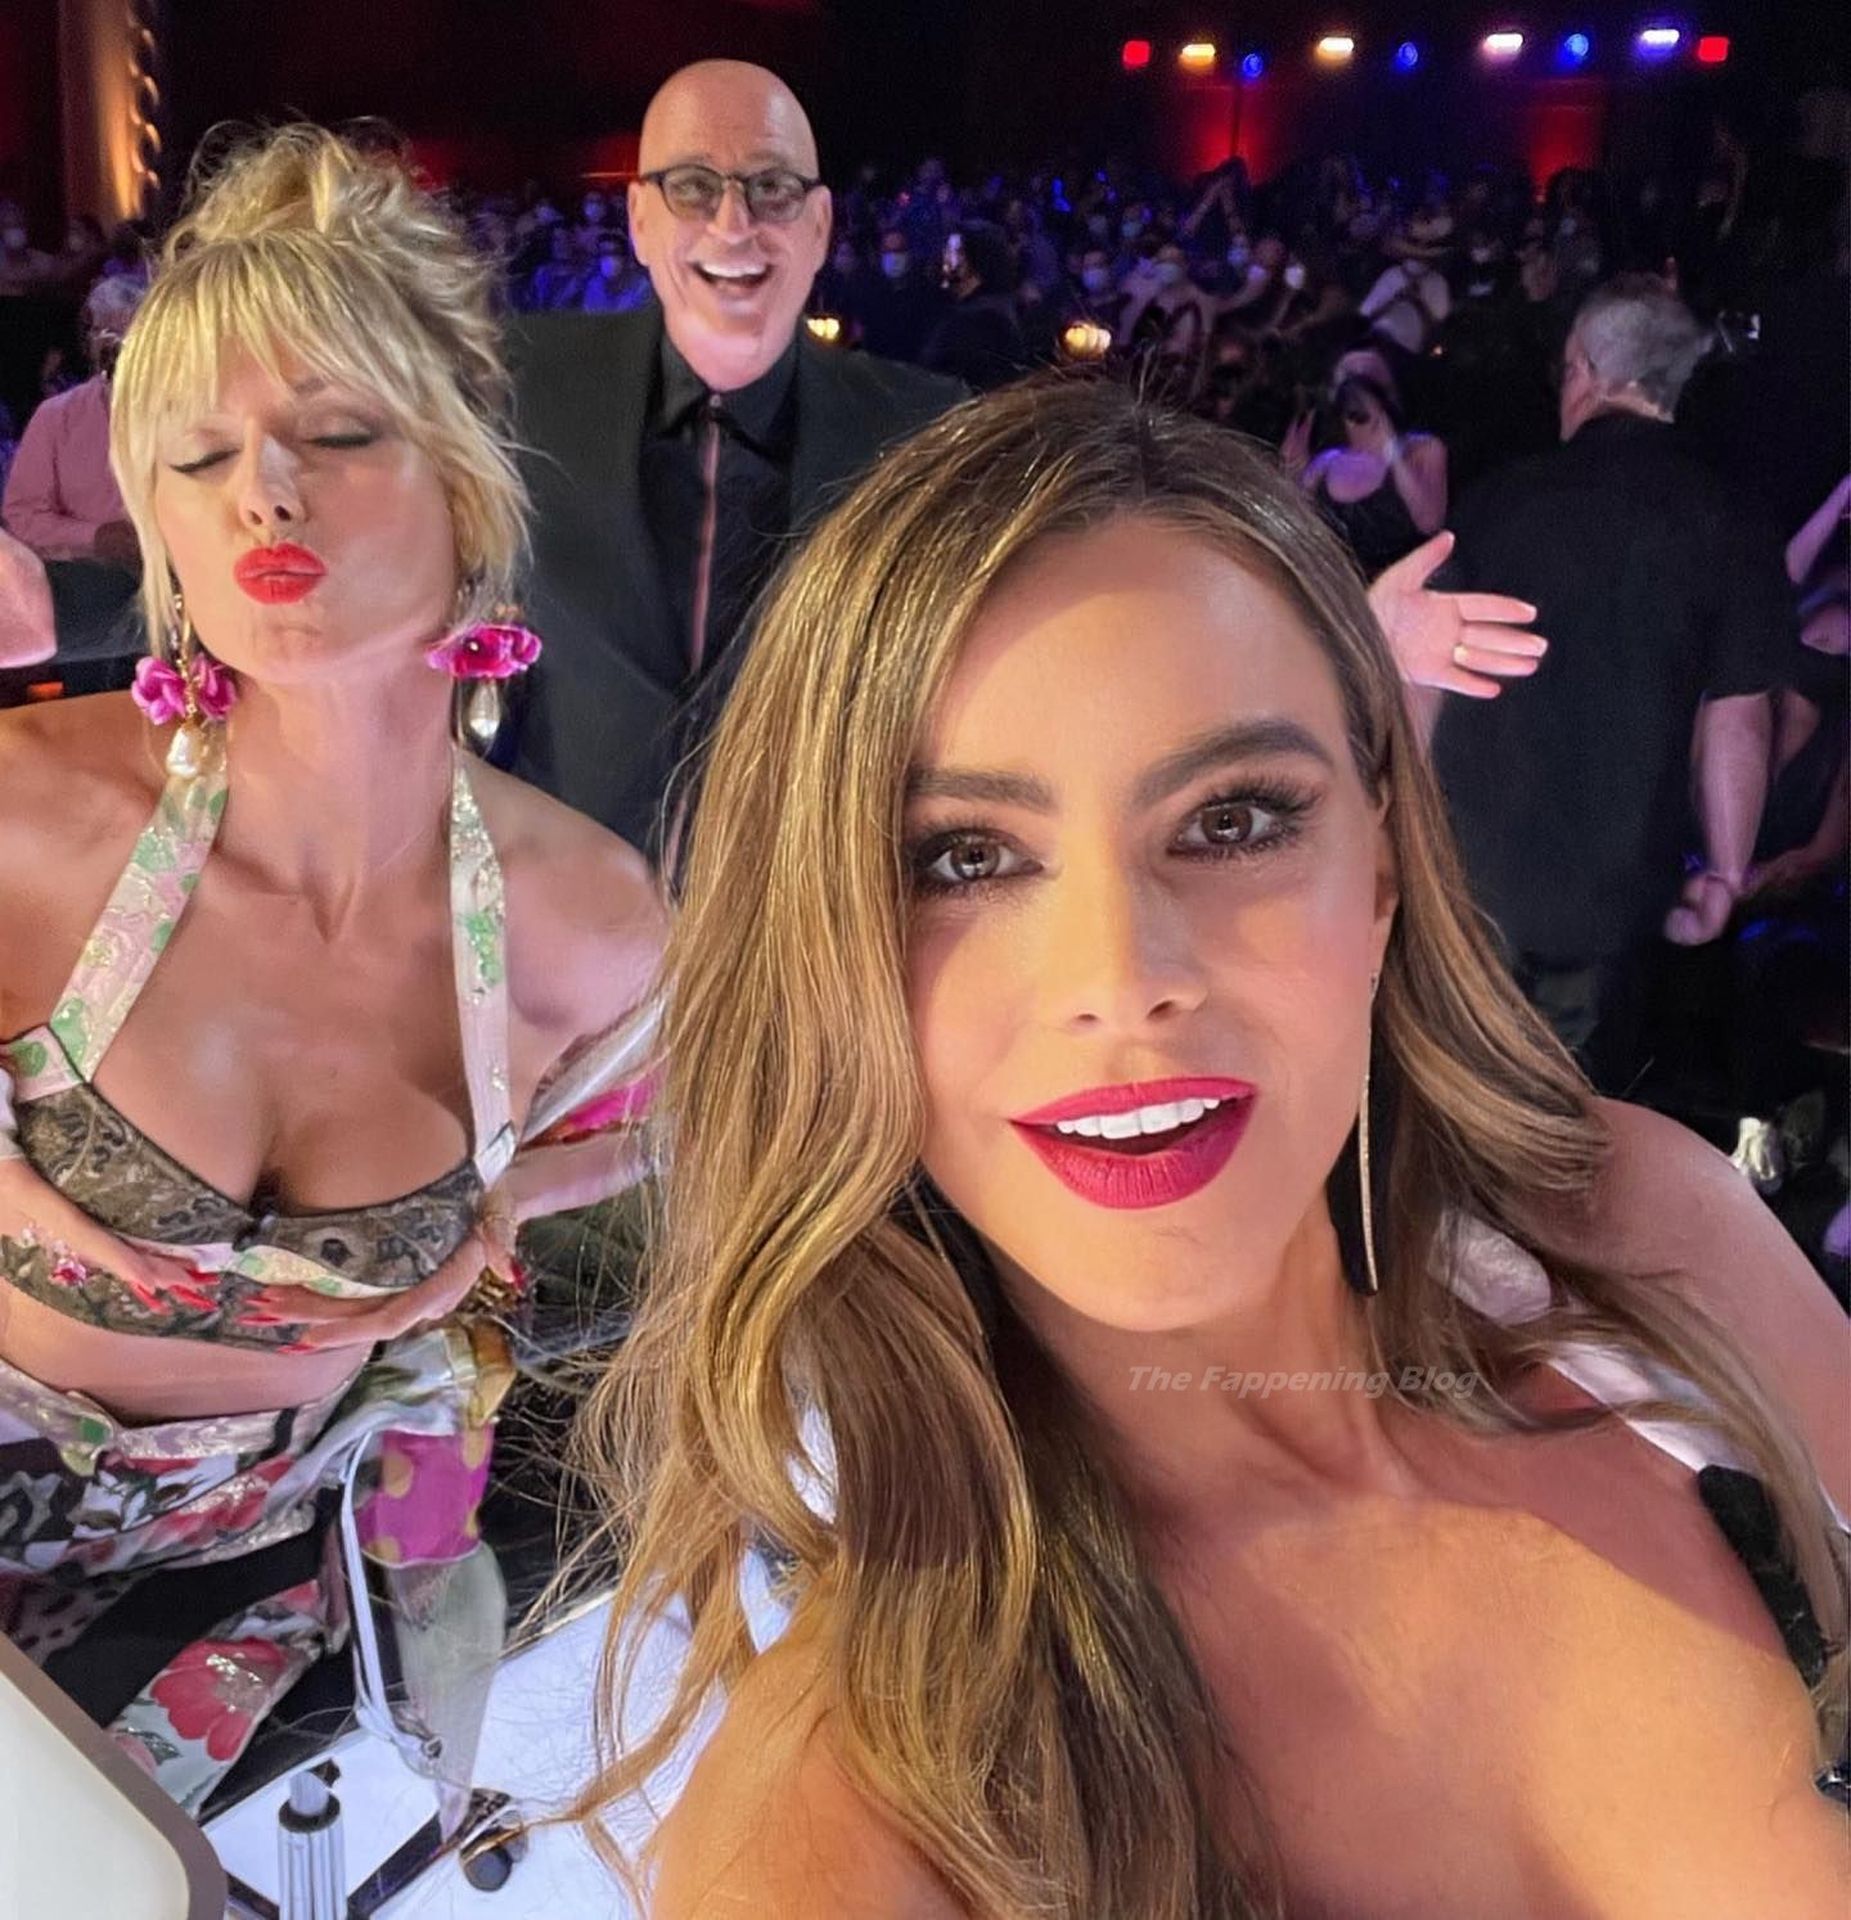 Sofia Vergara Shows Off Her Cleavage at the Americas Got Talent Show (31 Photos)